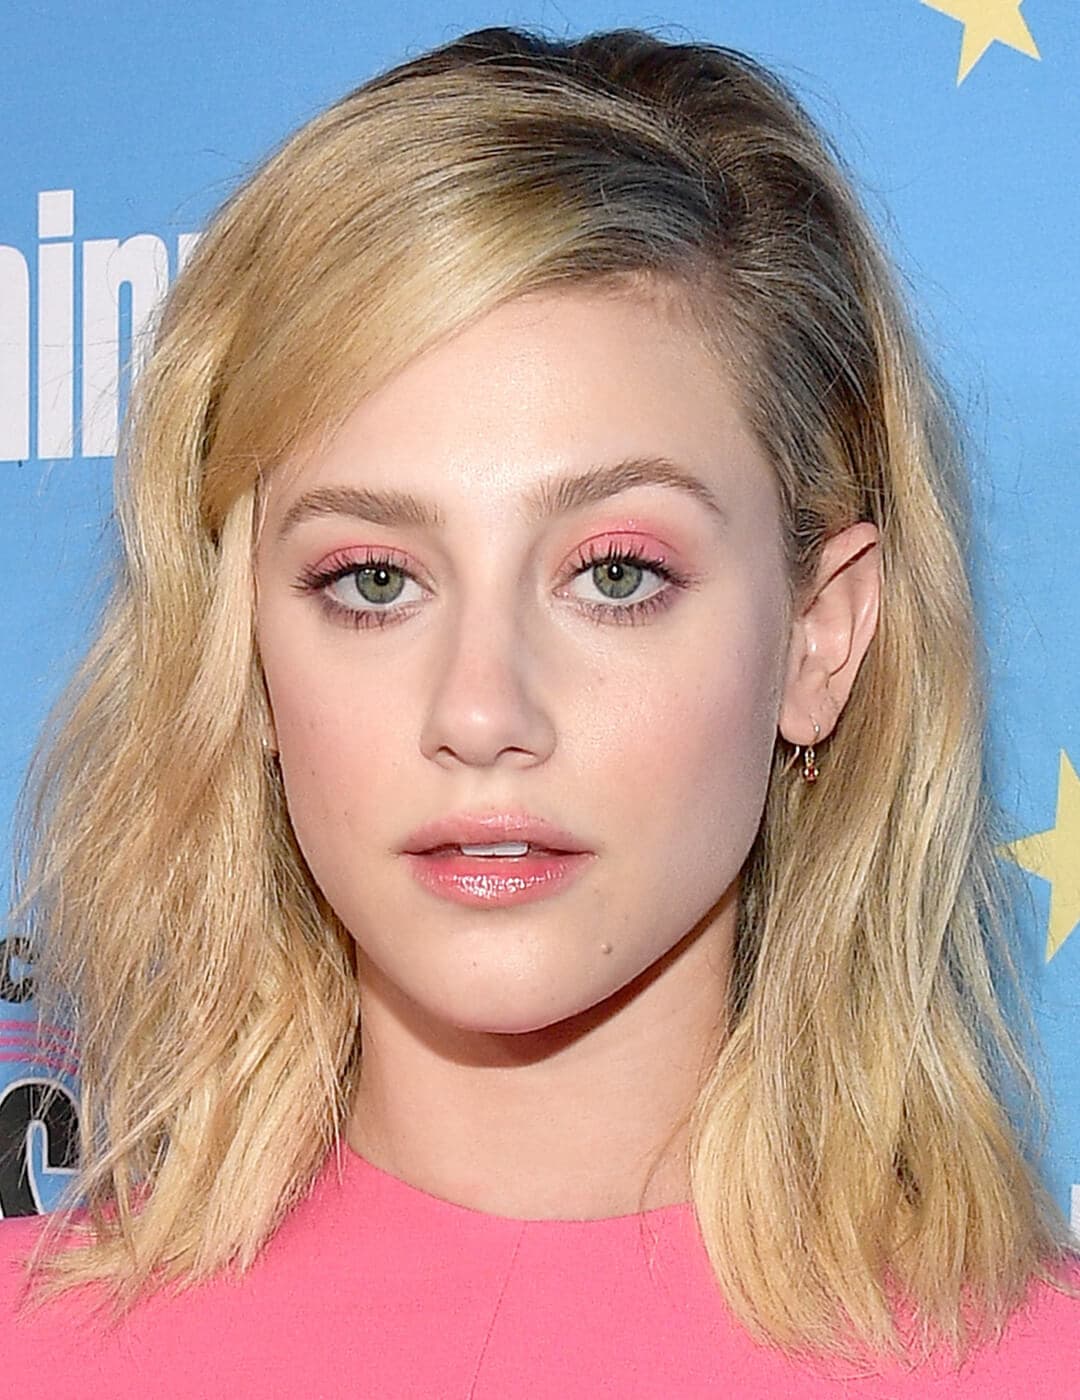 Lili Reinhart rocking a peach eyeshadow makeup look paired with nude lips on the red carpet